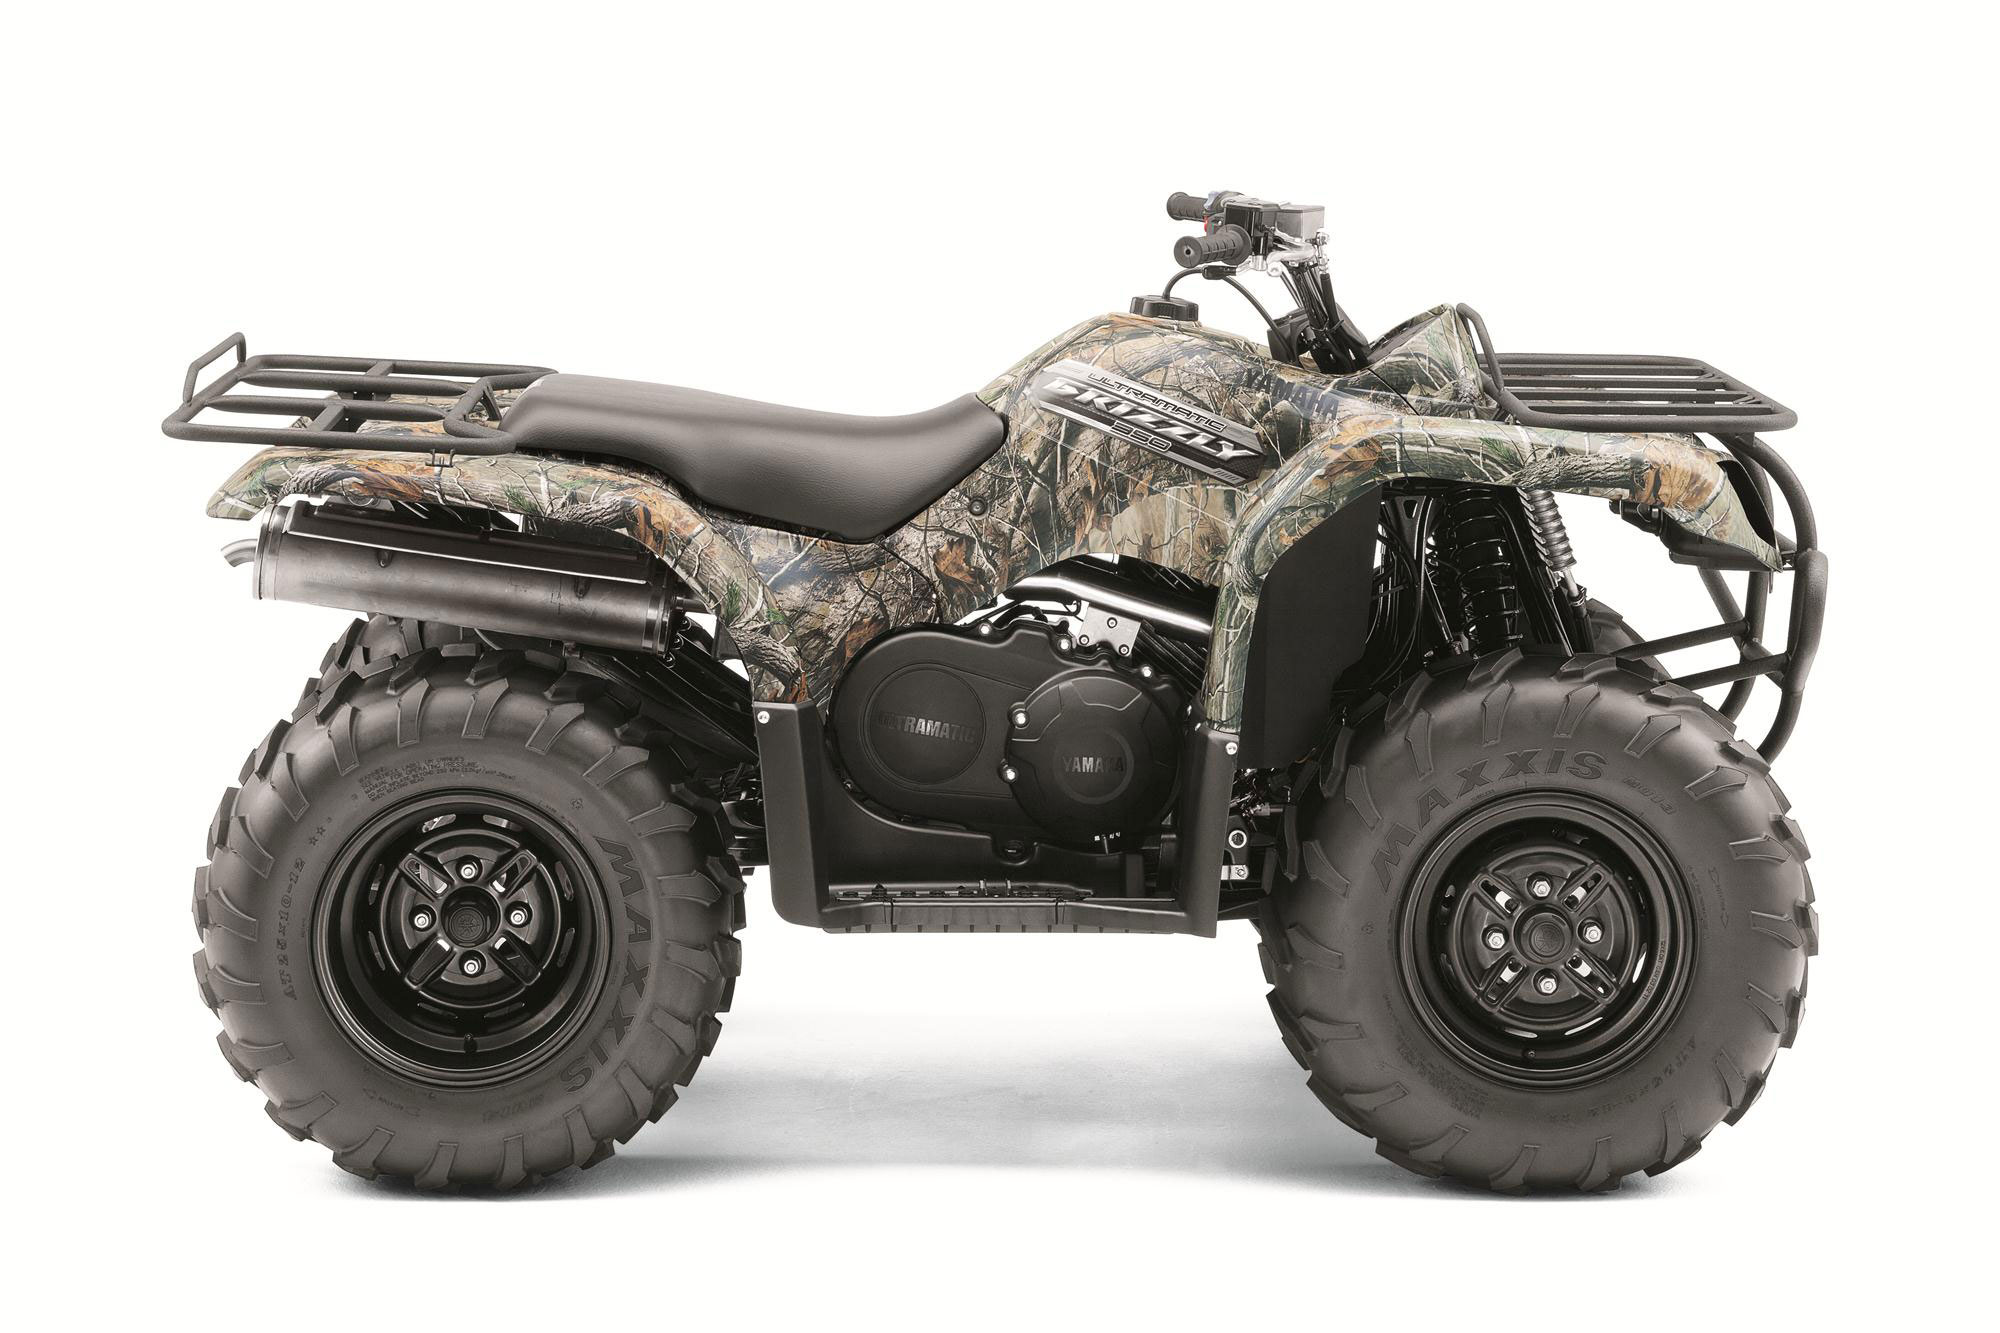 Yamaha Grizzly 80 Specs 2005 2006